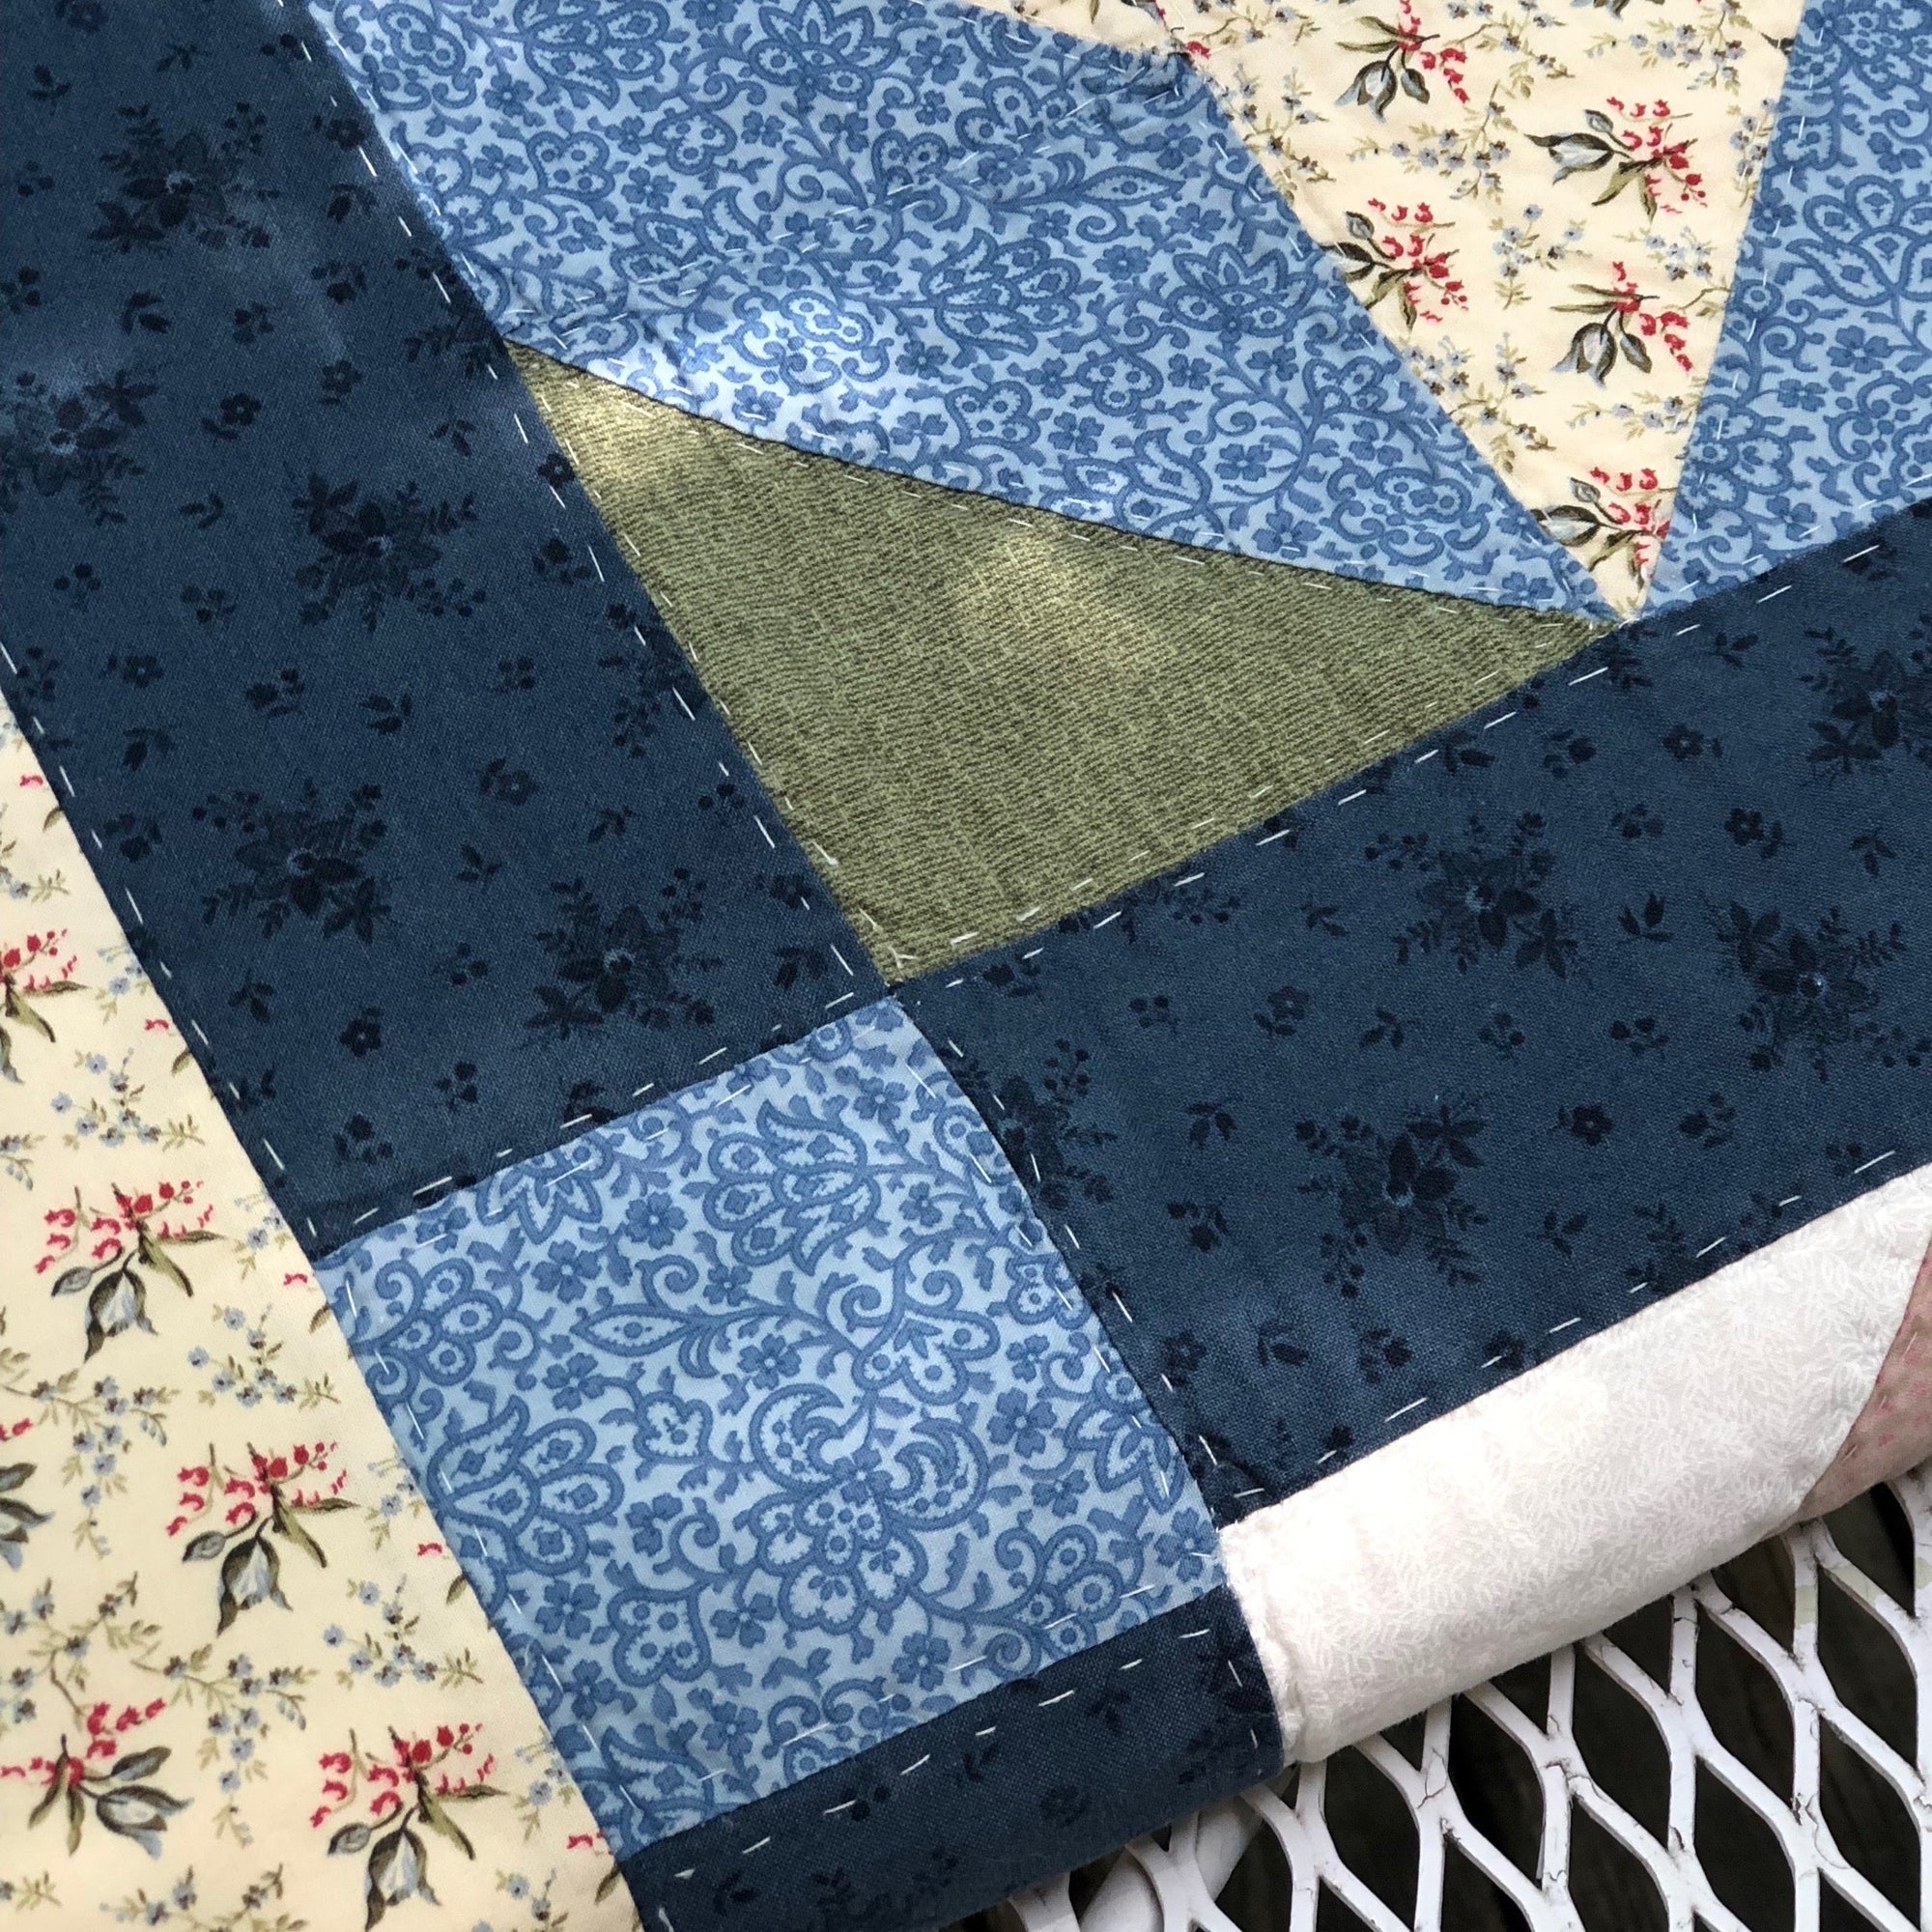 Learn to Make a Quilt by Hand - begins February 17 10am - 12pm